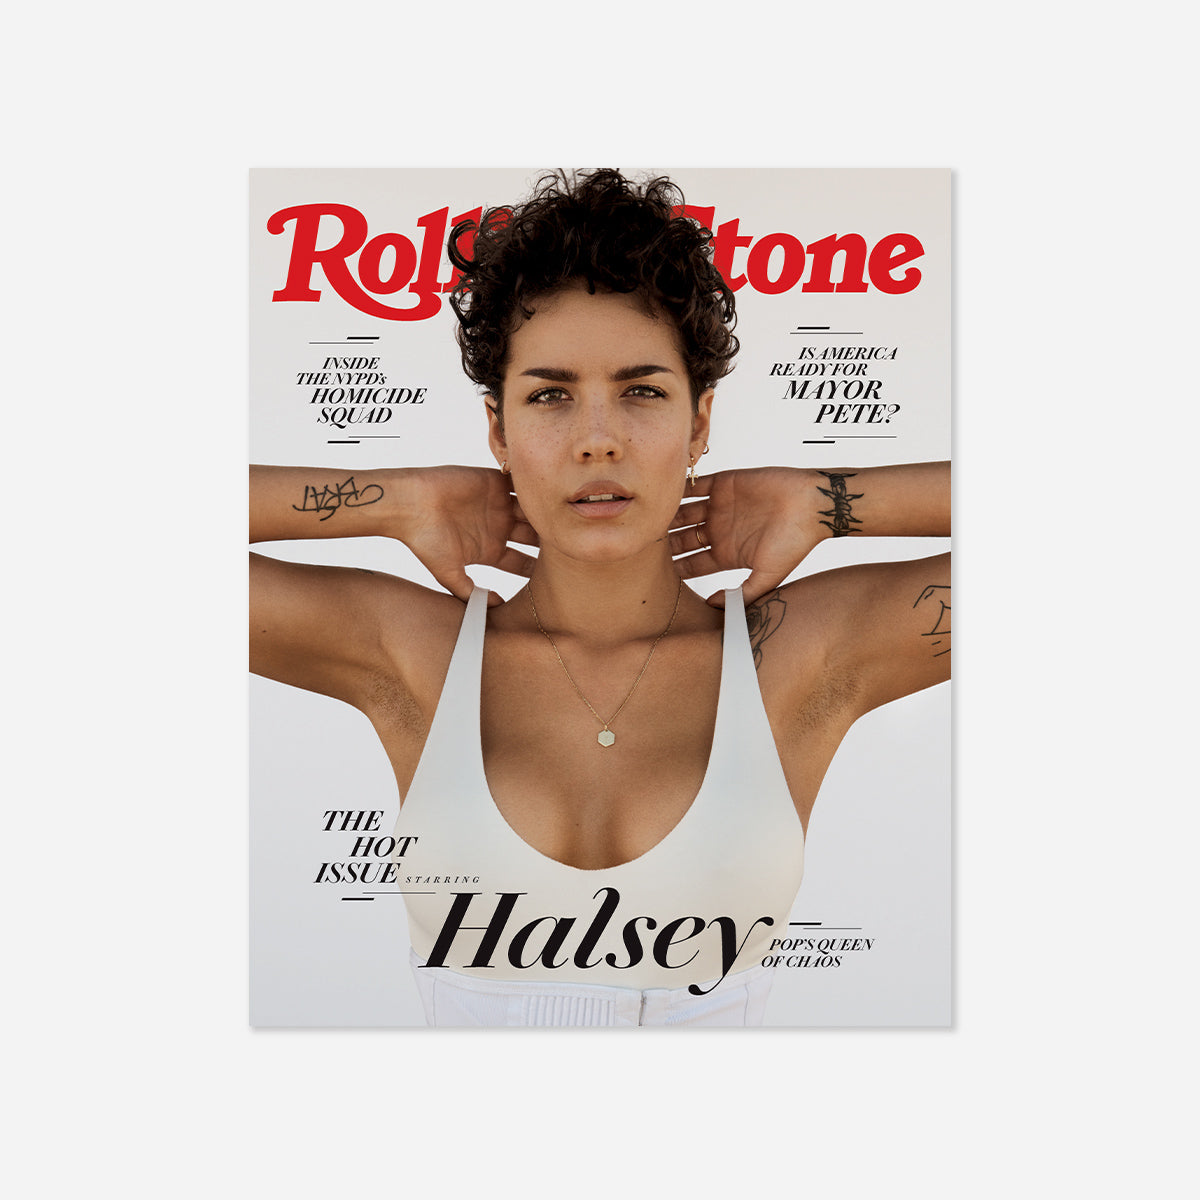 BTS Covers Rolling Stone Magazine June 2021 Issue: BTS ARMY Fans